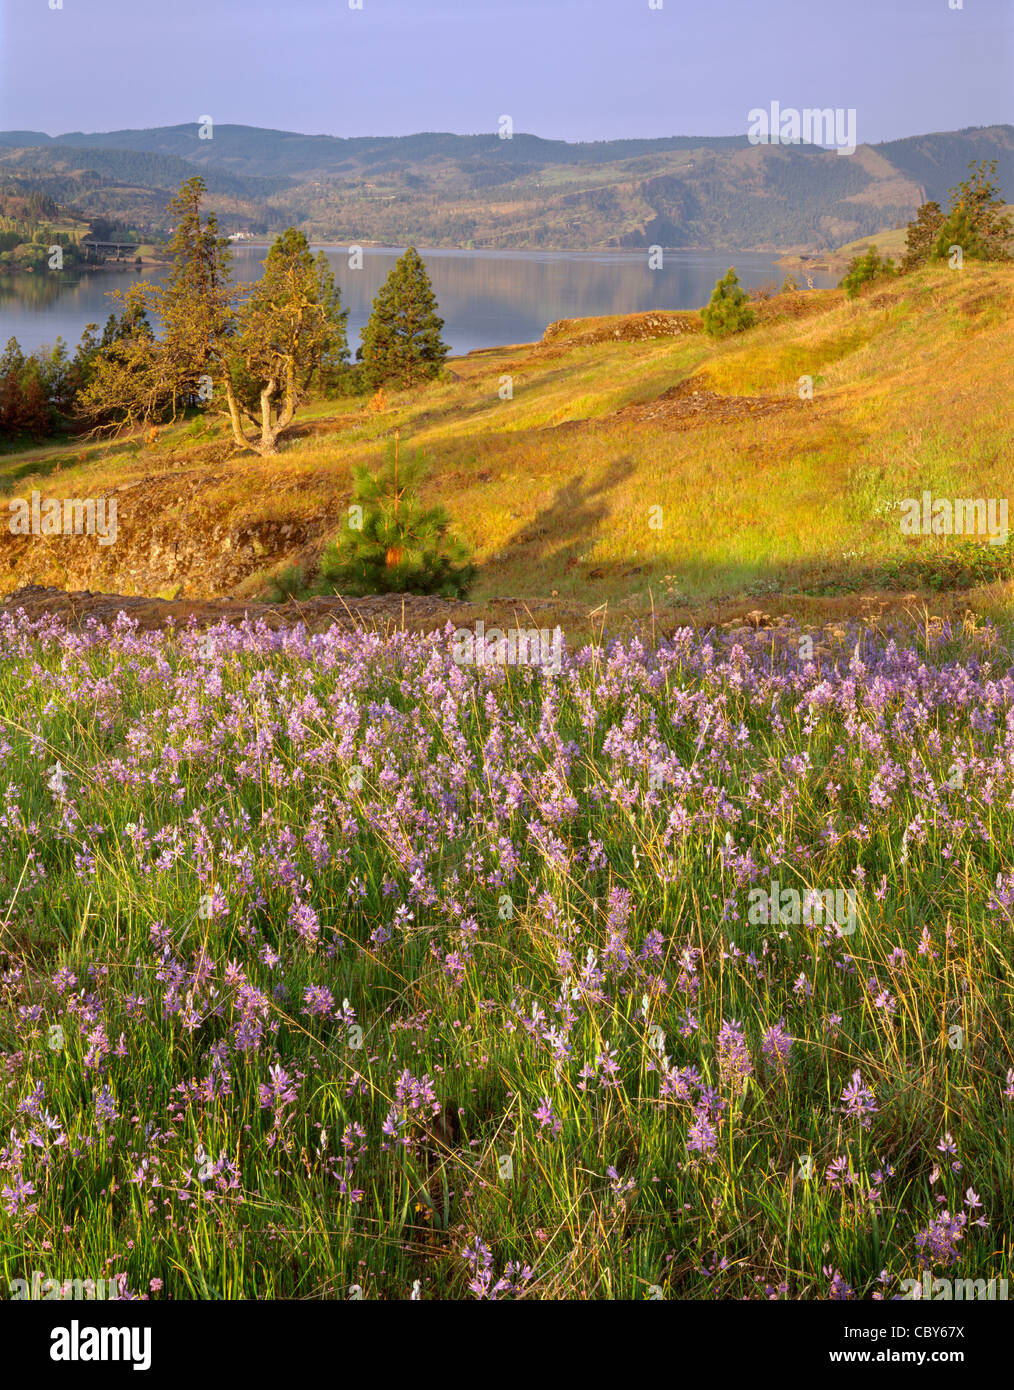 Camas blooms in Catherine Creek area; in the distance is the Columbia River, Columbia River Gorge Nat. Scenic Area, WA, USA Stock Photo